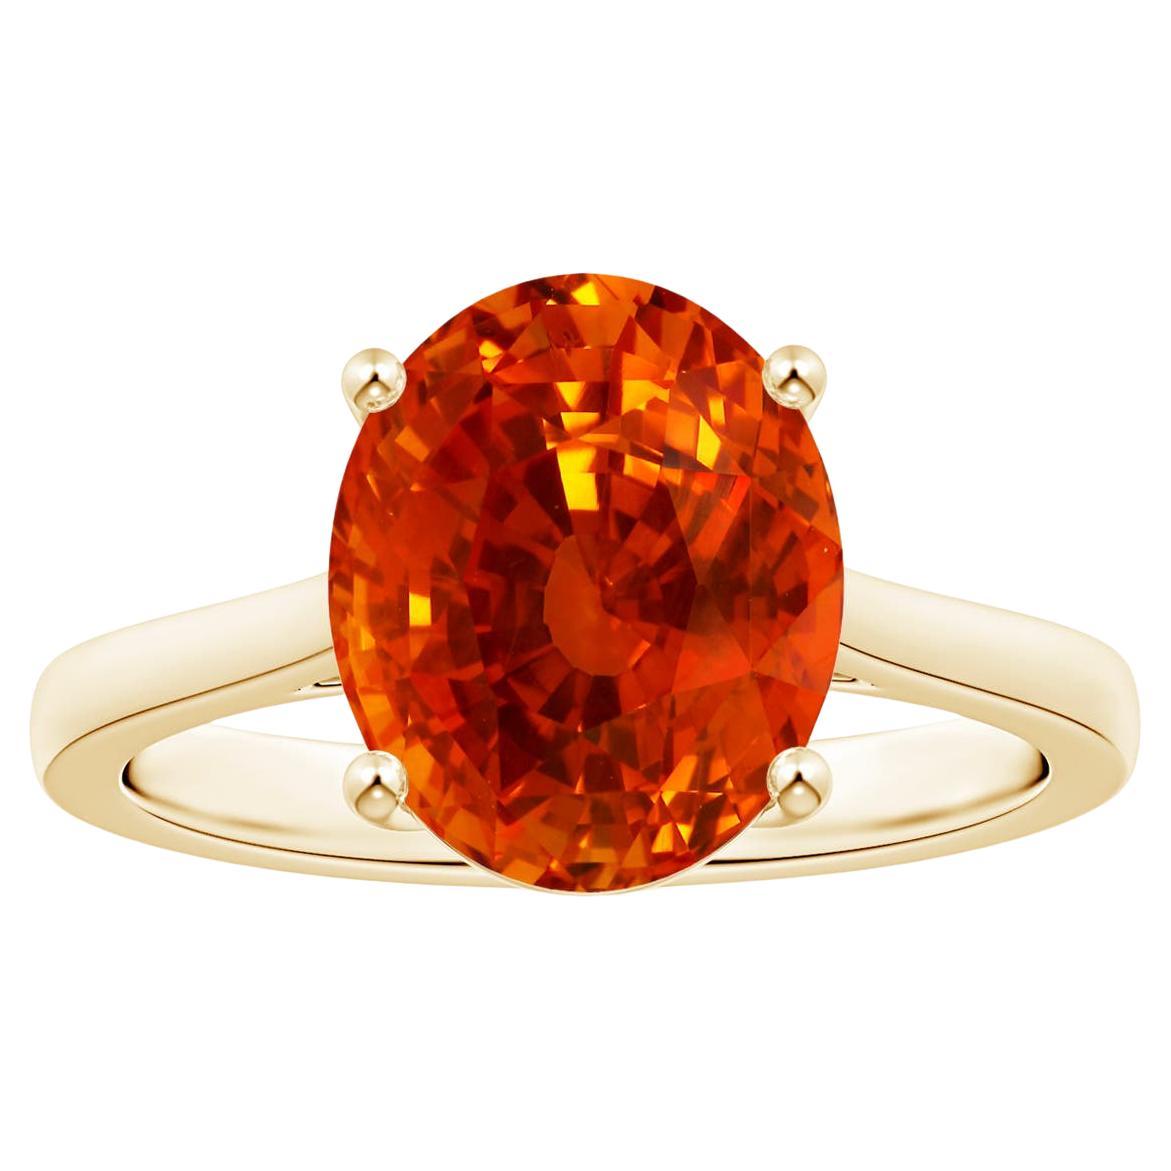 For Sale:  Angara Gia Certified Natural Orange Sapphire Solitaire Ring in Yellow Gold